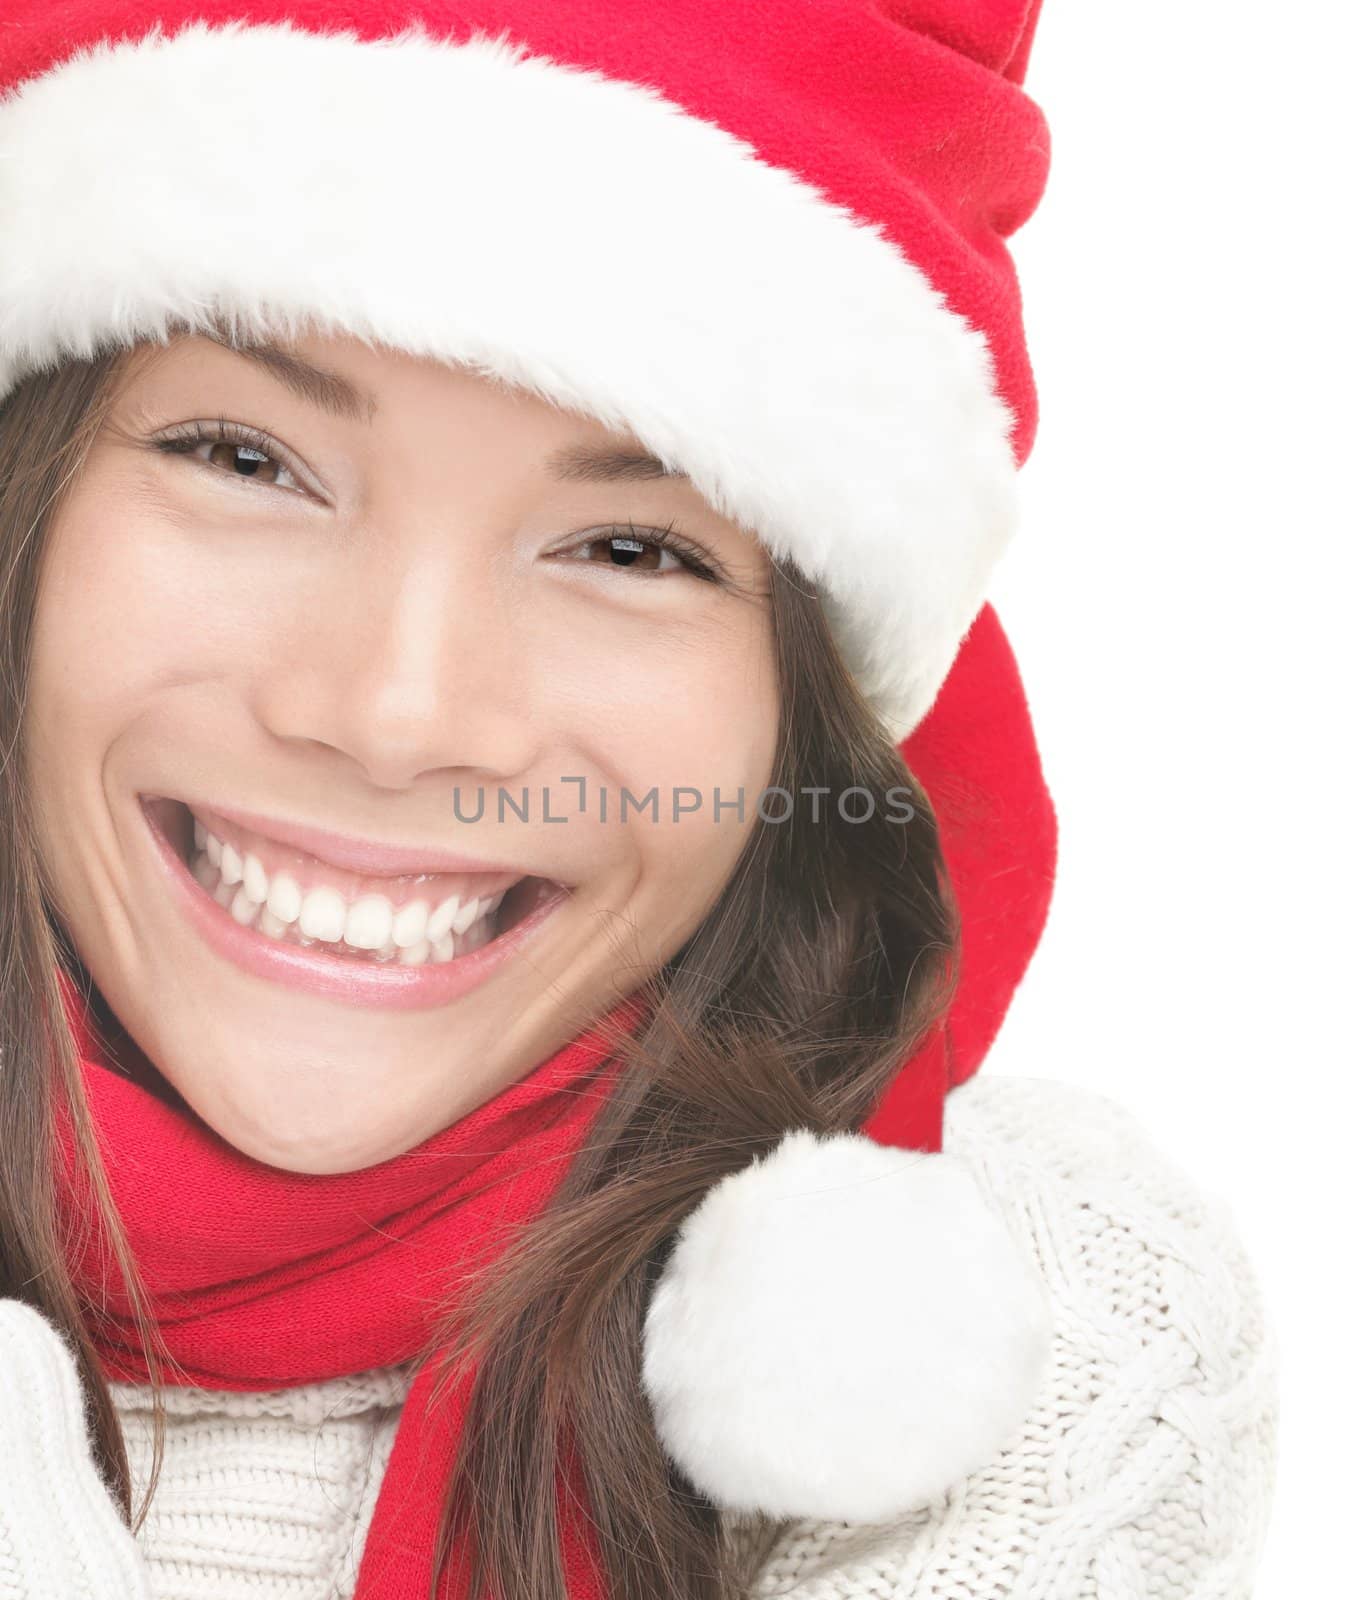 Christmas woman smiling portrait. Young woman wearing Santa hat, sweater and red scarf. Closeup photo of cute Asian / Caucasian woman isolated on white background